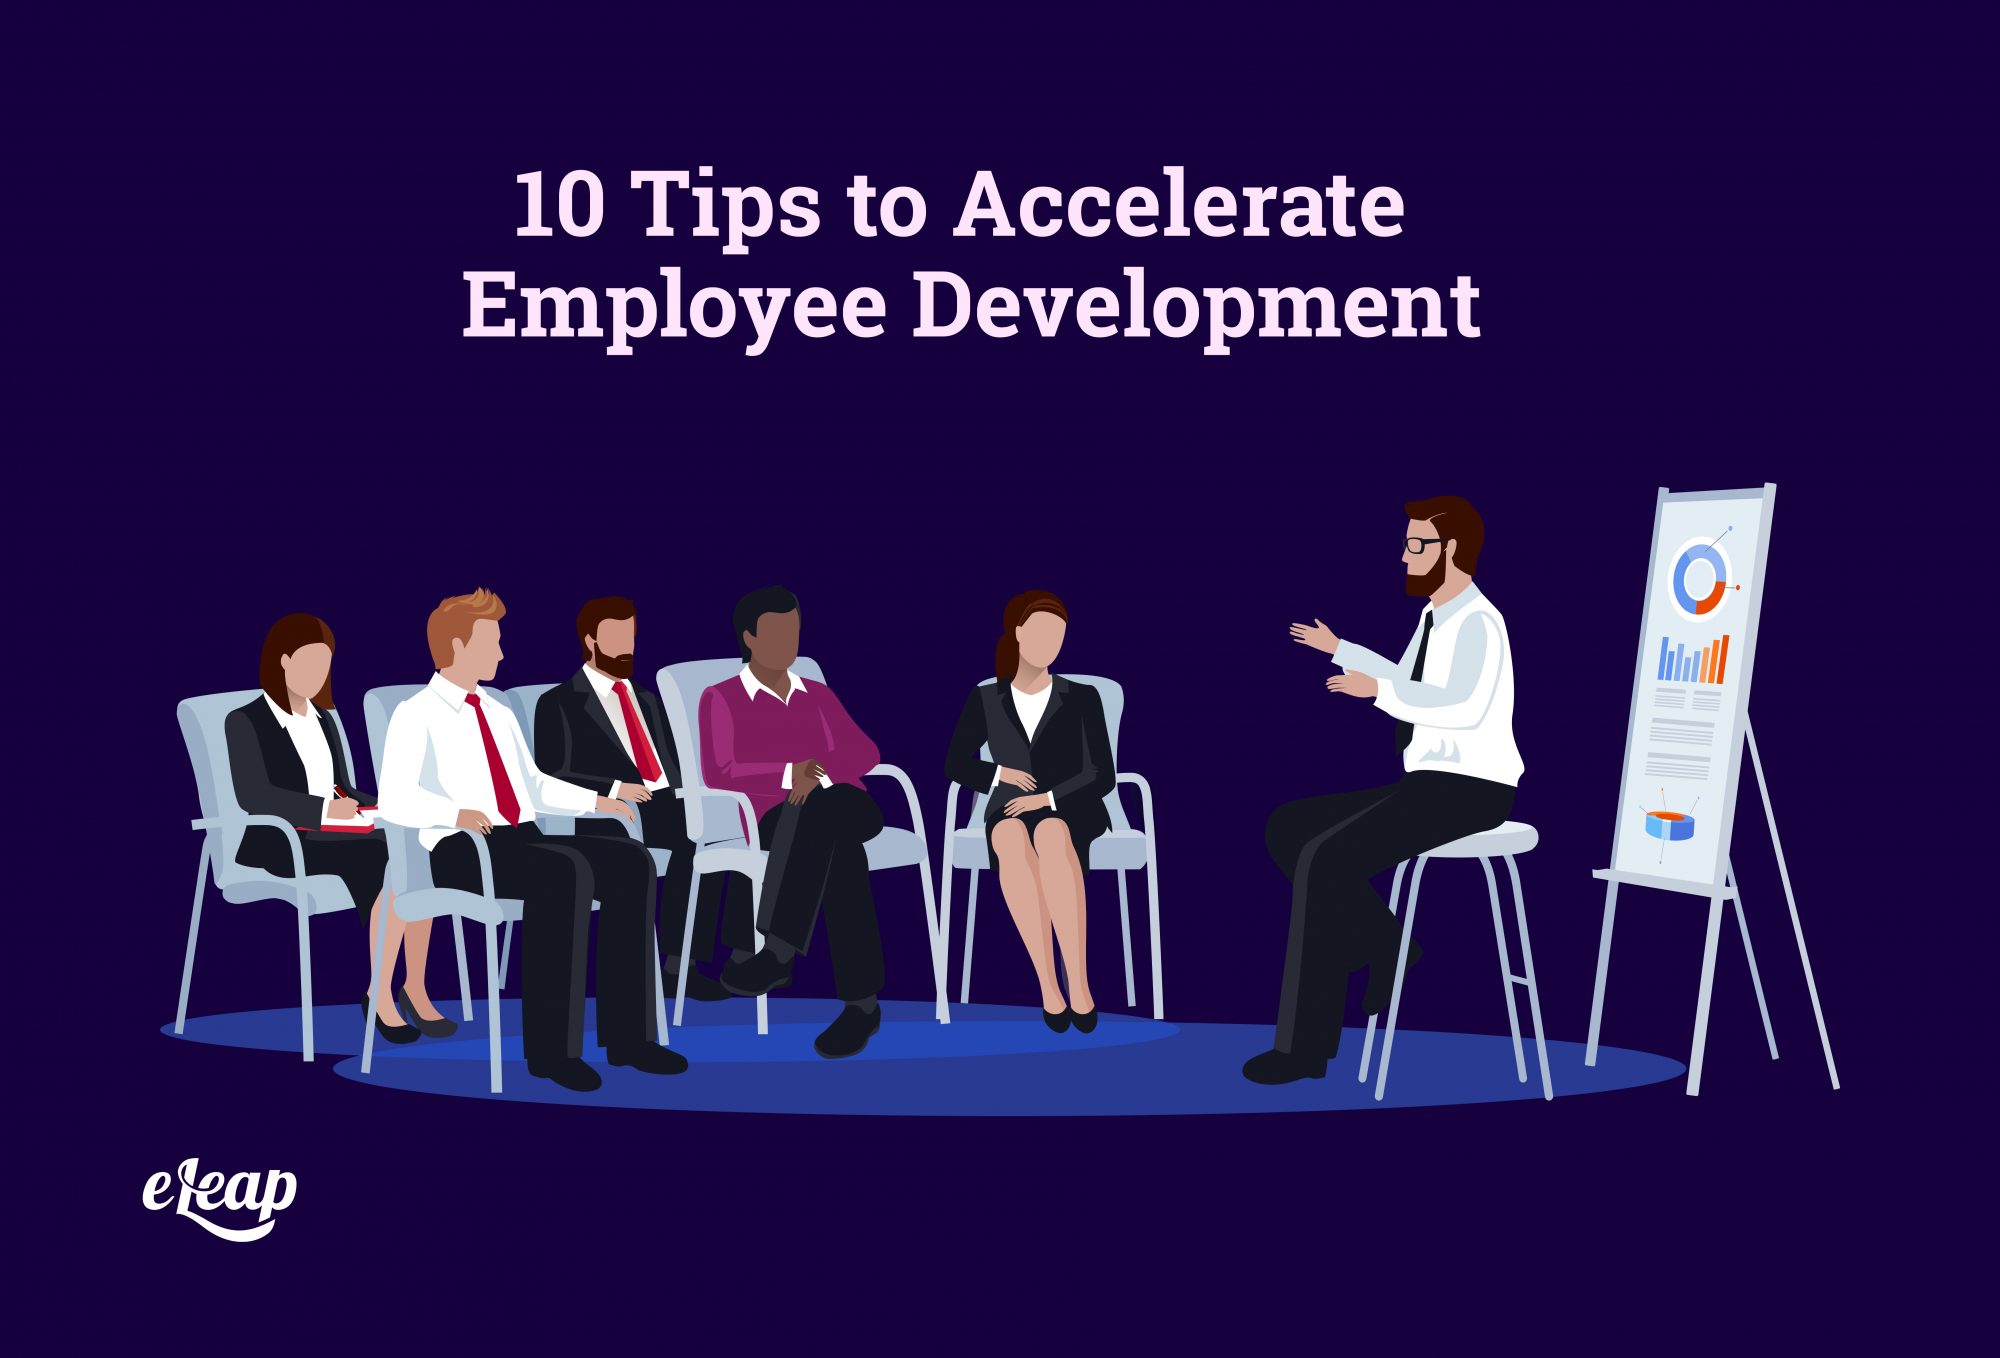 10 Tips to Accelerate Employee Development